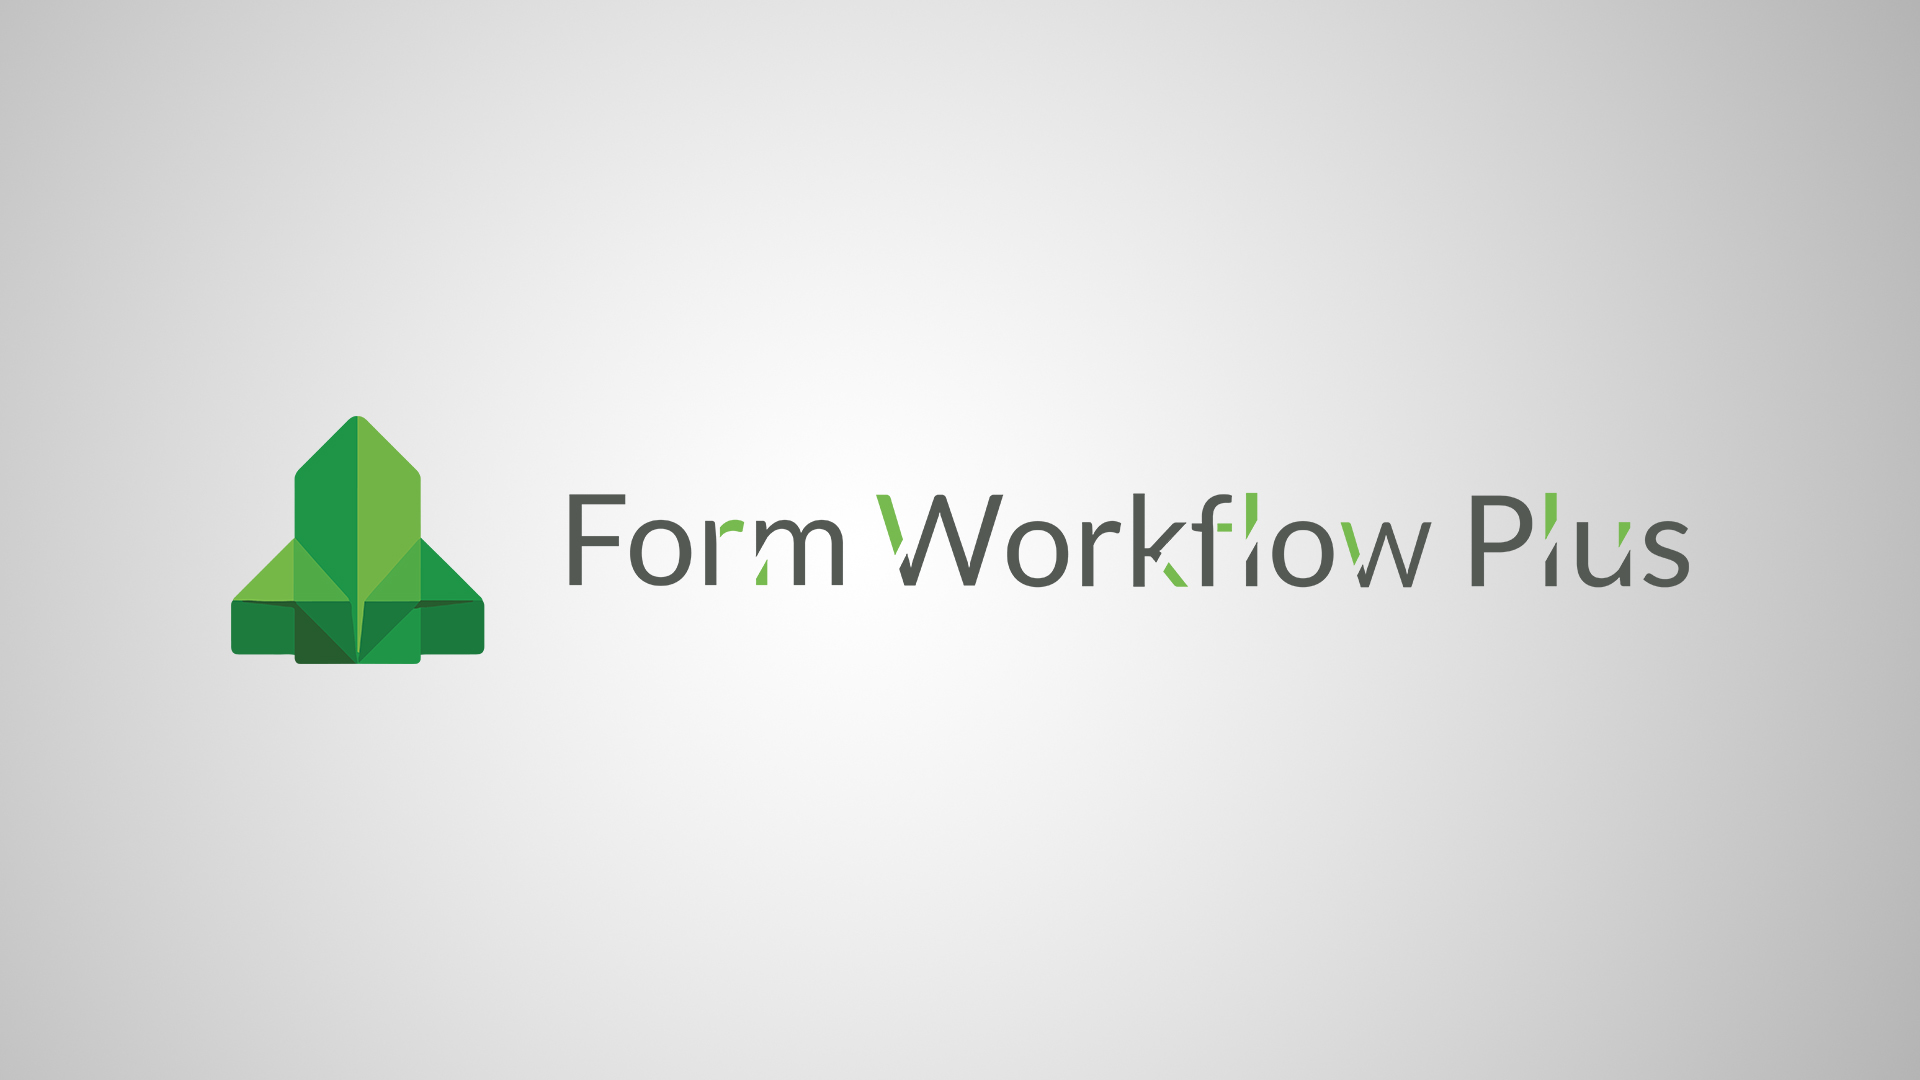 September Updates for Form Workflow Plus and Our Social Media Presence